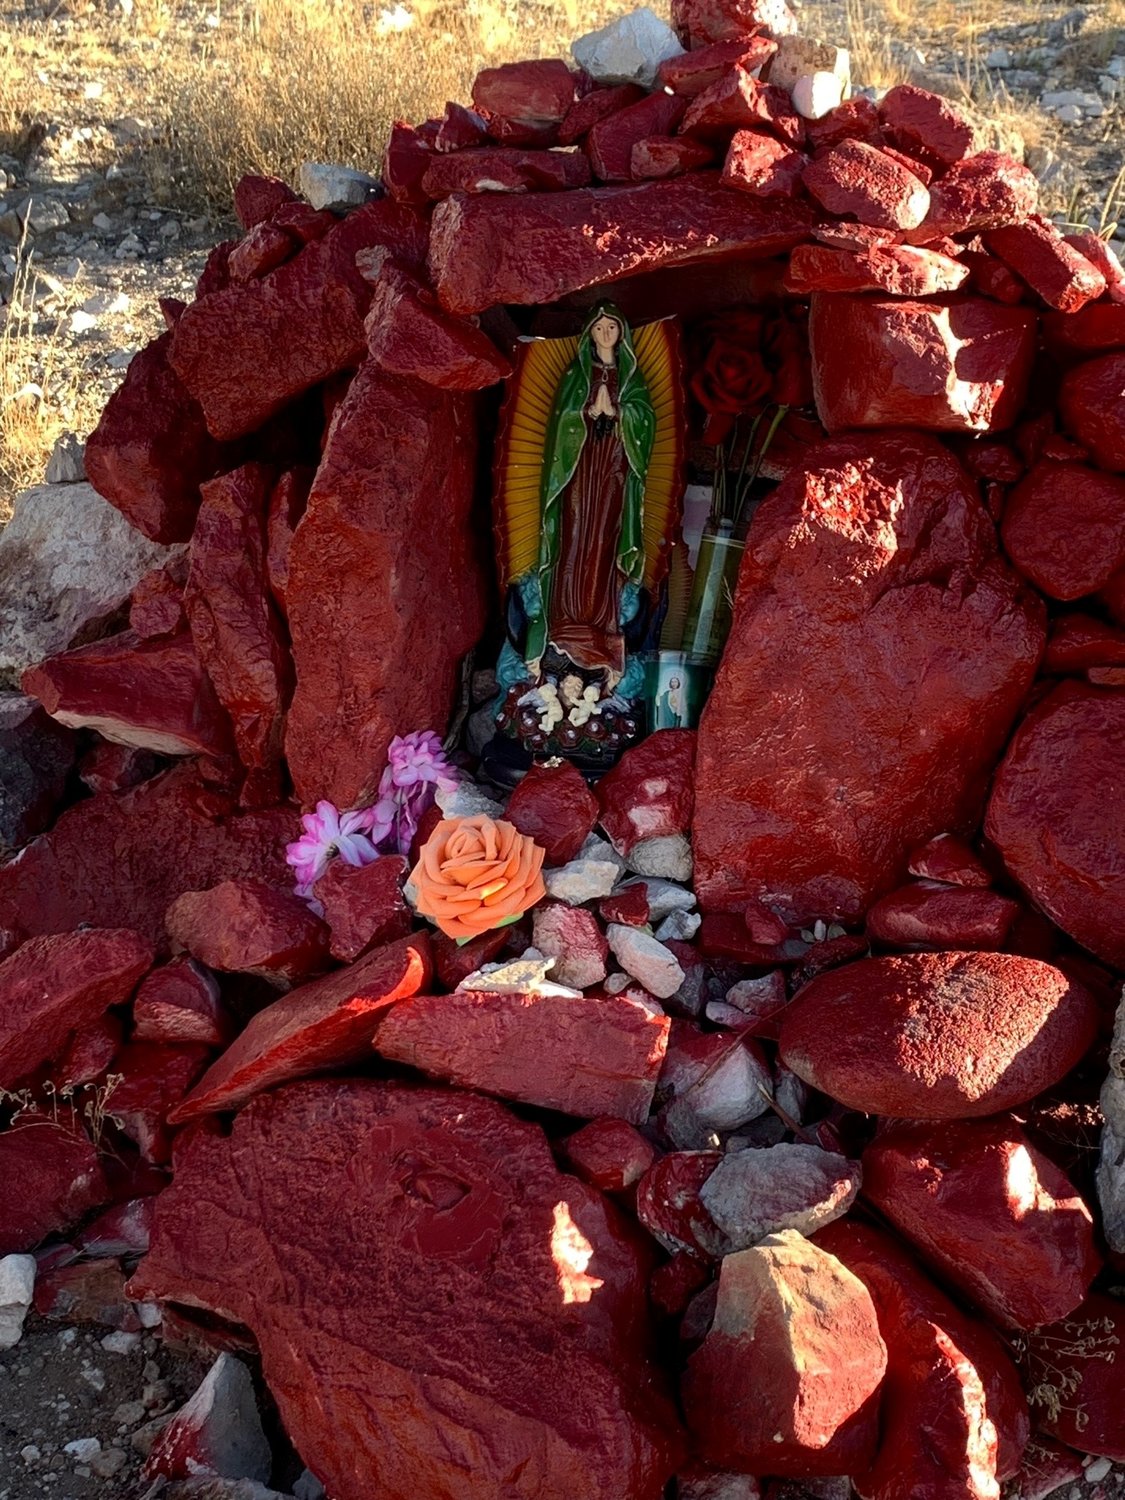 This shrine to Our Lady of Guadalupe is one of a handful of tributes at the top of Tortugas Mountain. For more than 100 years, the Tortugas Pueblo and parishioners of Our Lady of Guadalupe Church in Tortugas have made a Dec. 11 pilgrimage to the mountaintop in celebration.